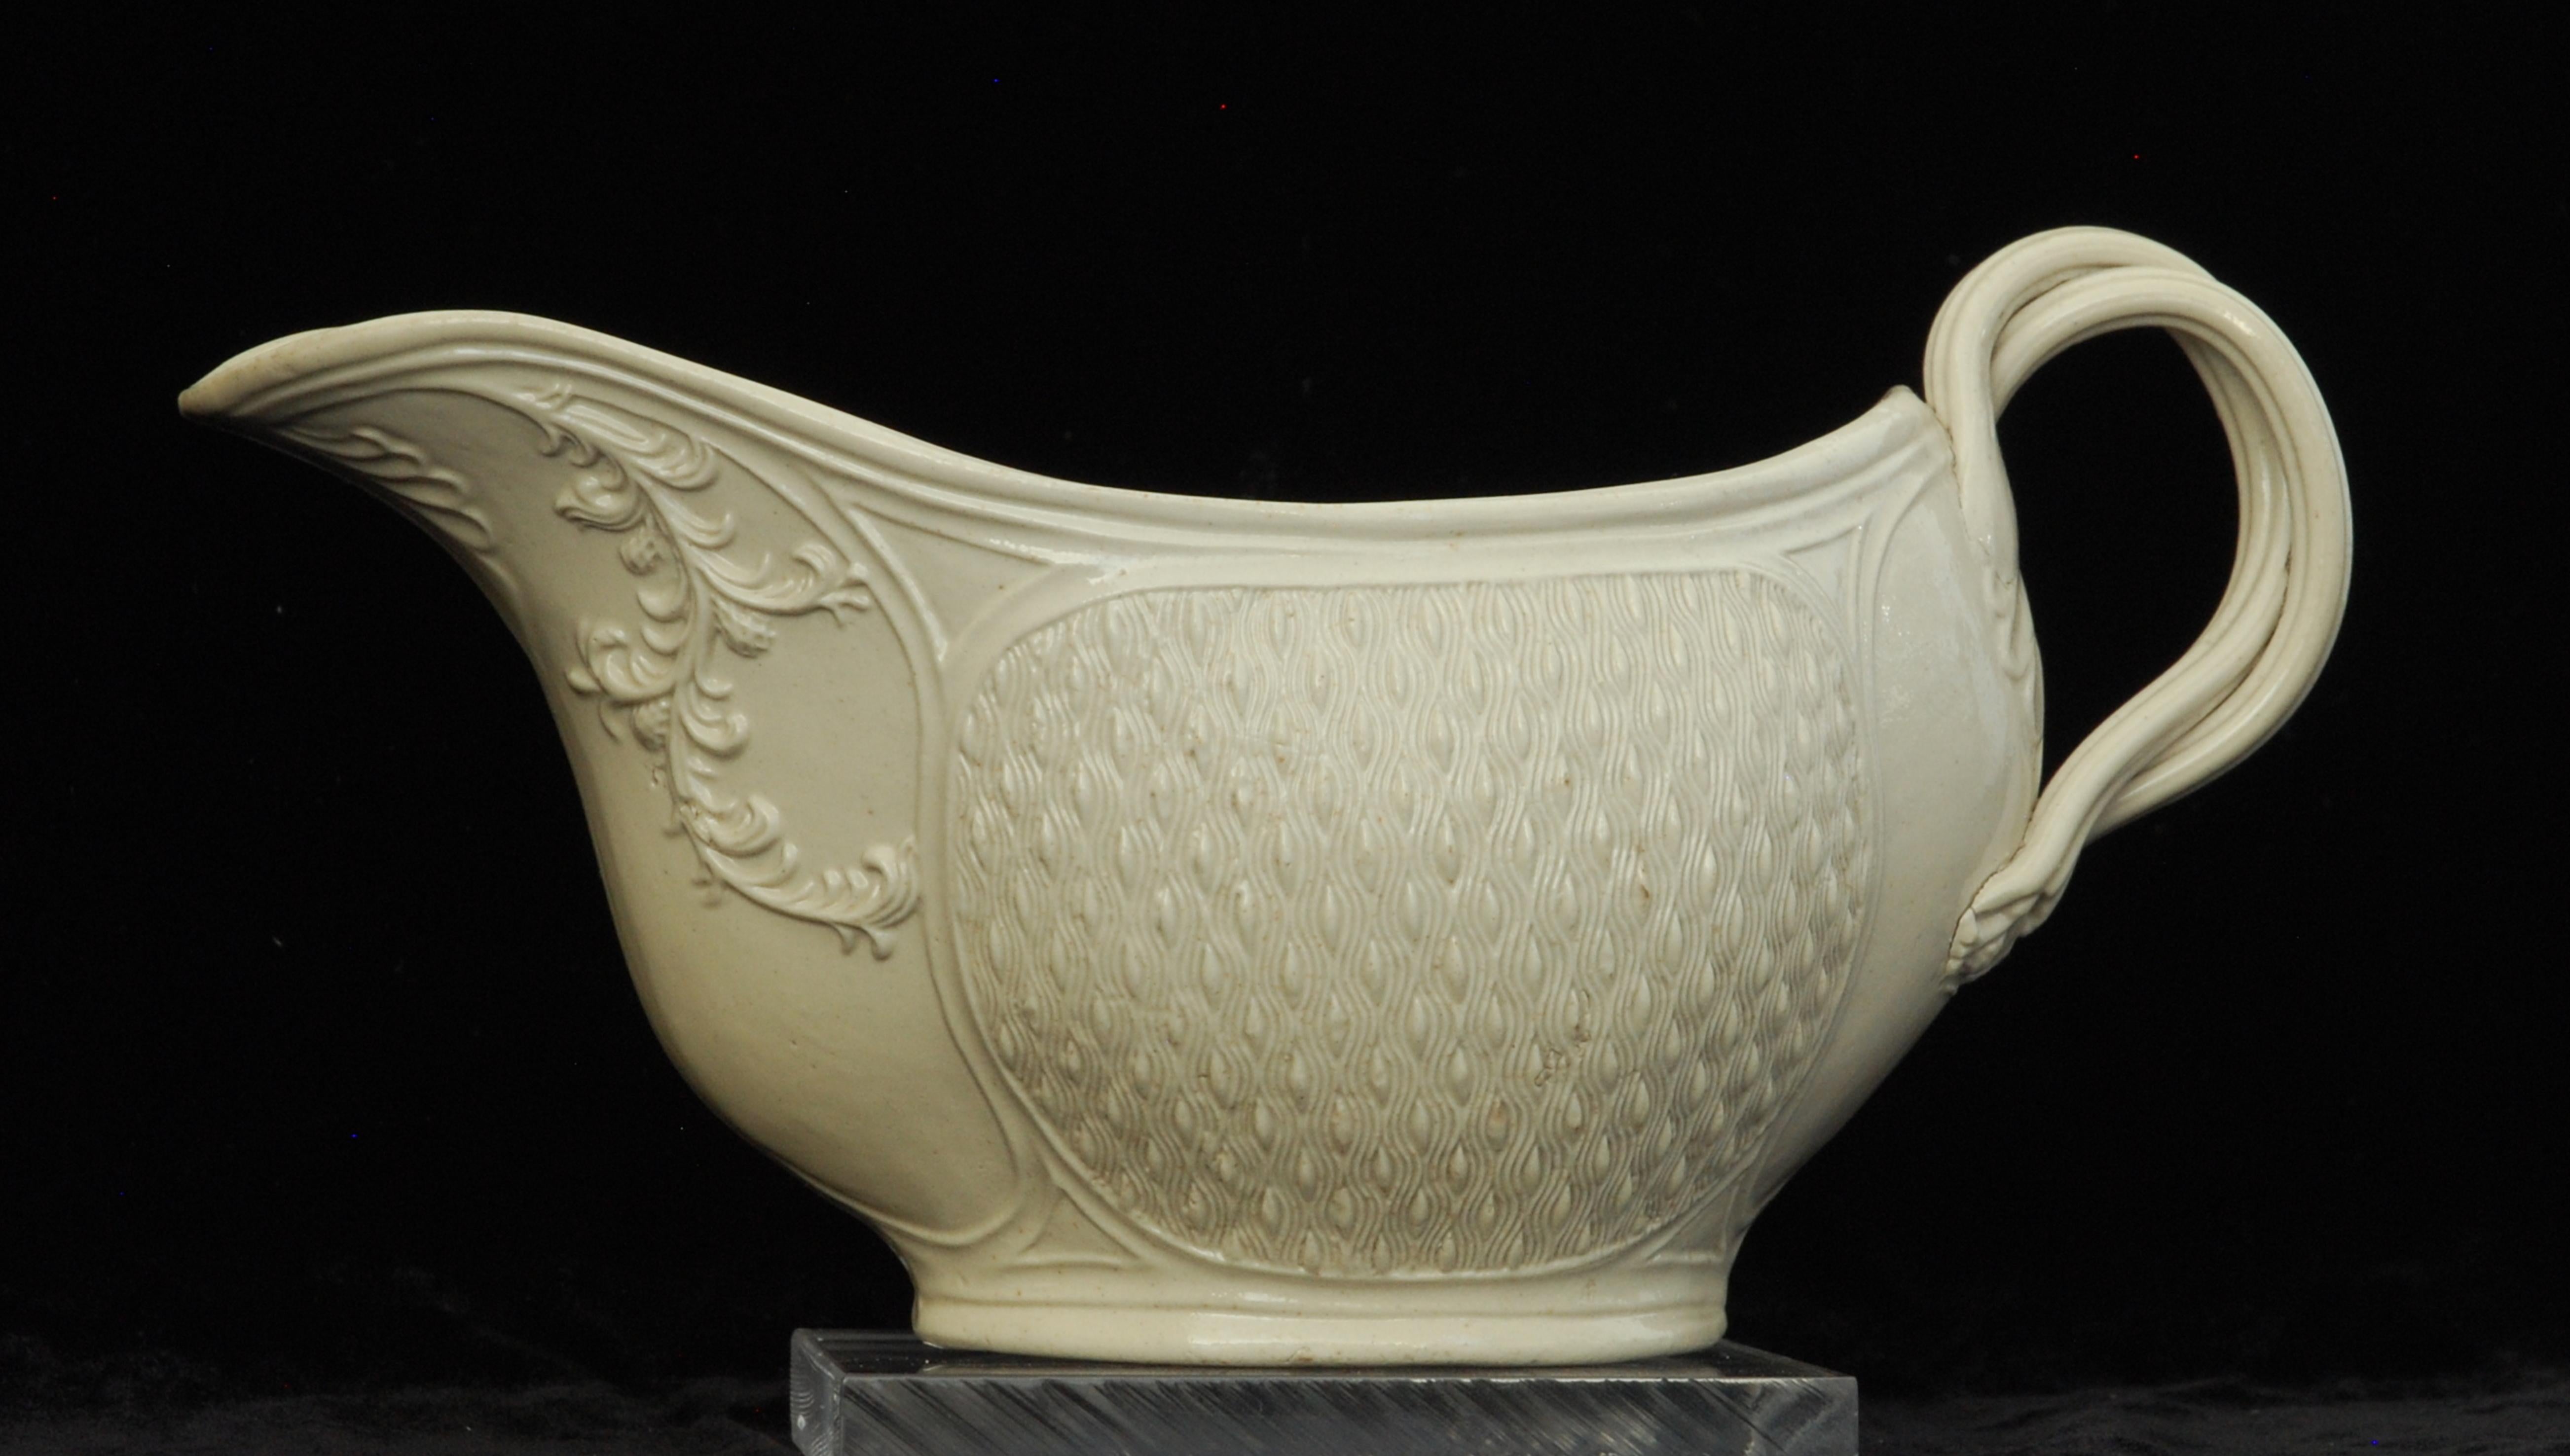 An excellent example of the popular Barleycorn pattern, crisply moulded in panels to the sides, with graceful sprigs. Salt-glaze particularly suits this sort of fine relief.

Excellent Provenance: Oster, Twigg, & Kanter collections; Jonathon